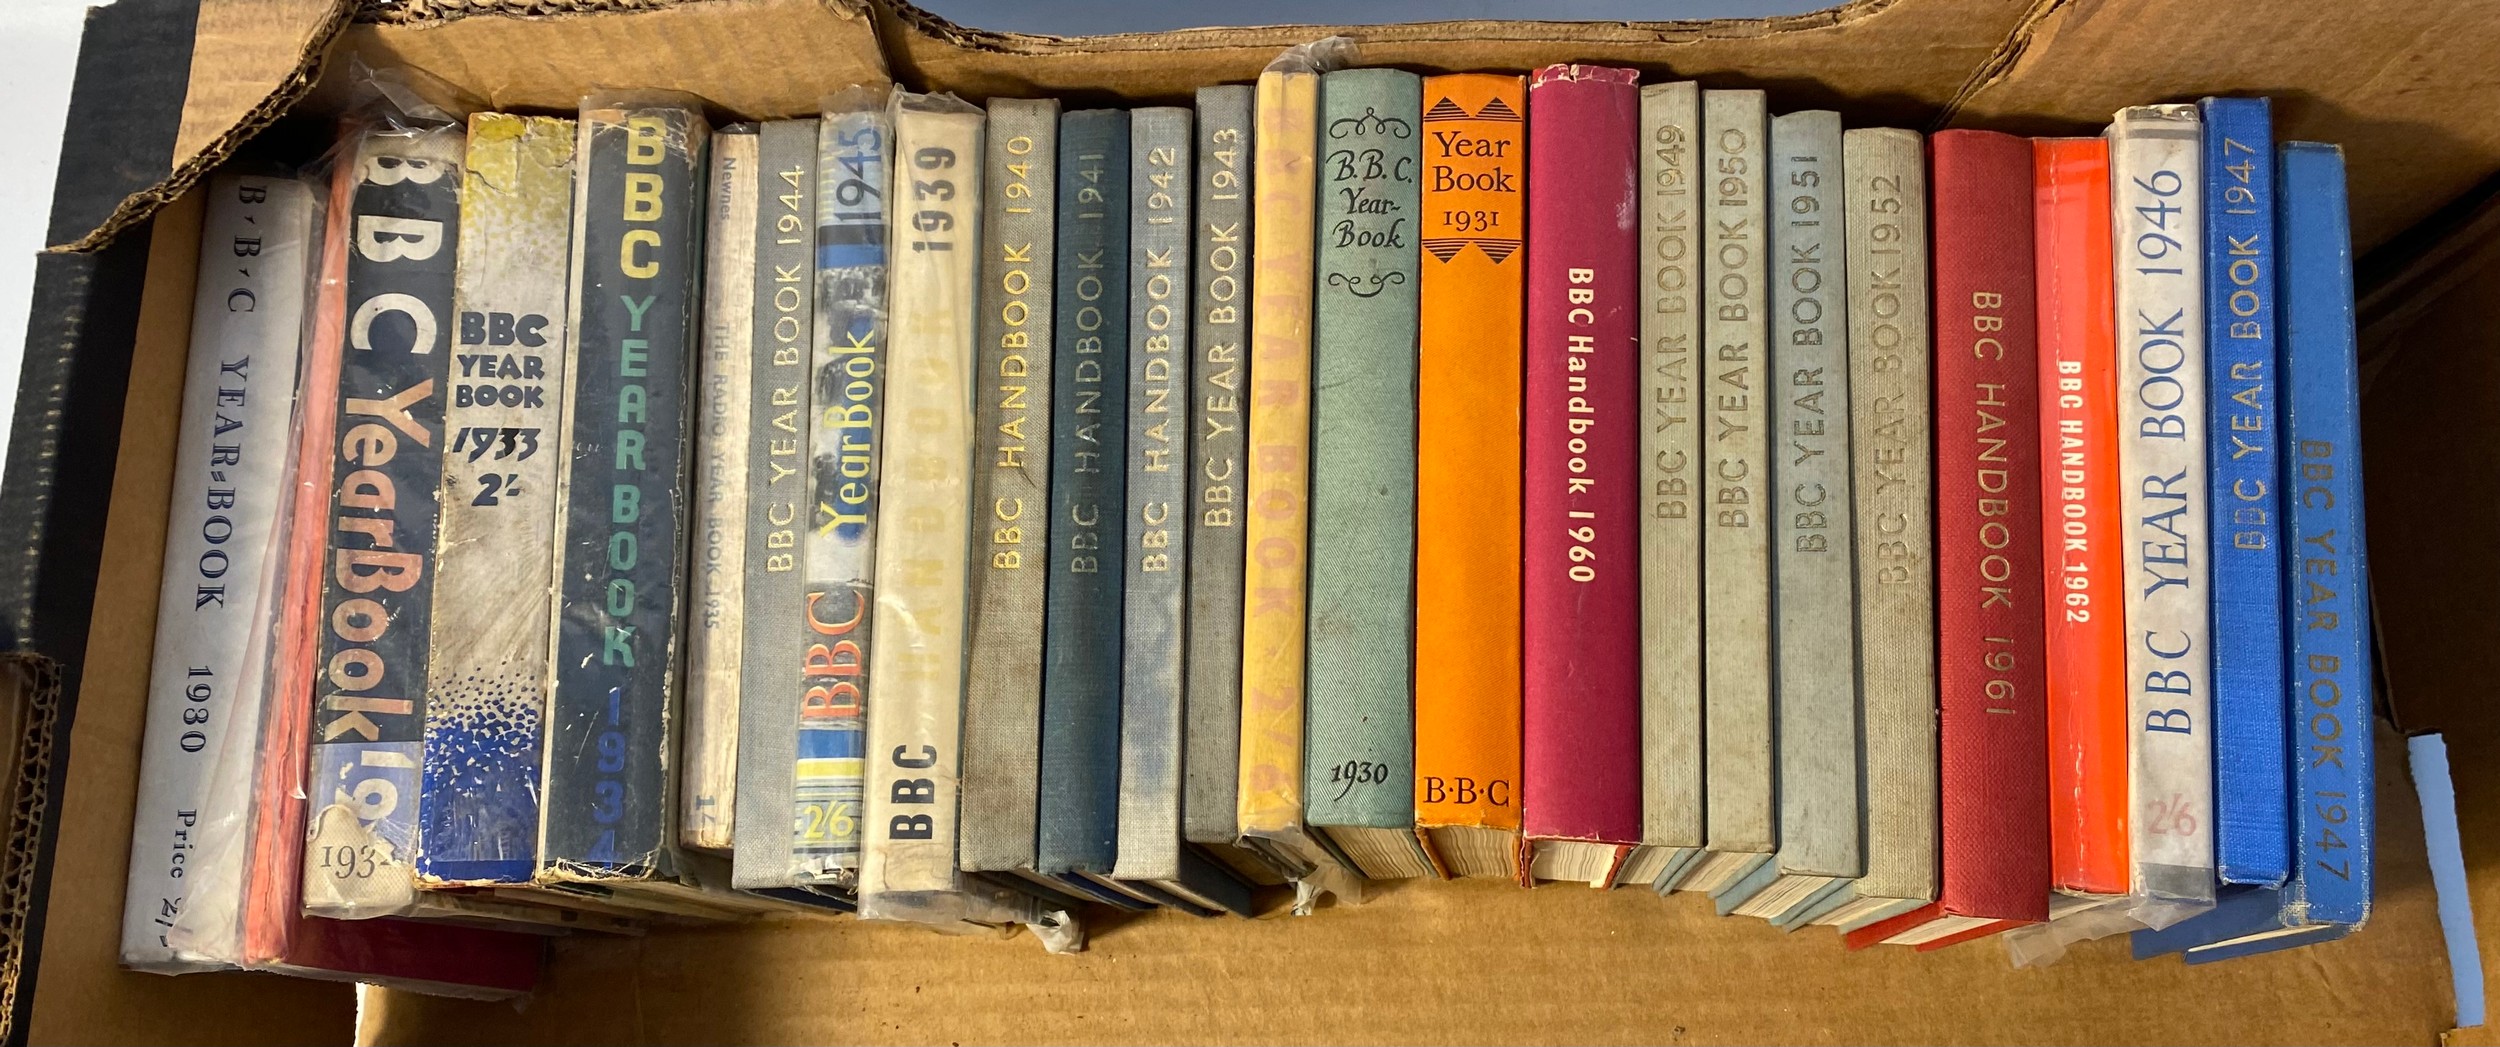 BBC year books & hand books dating from 1930-1962